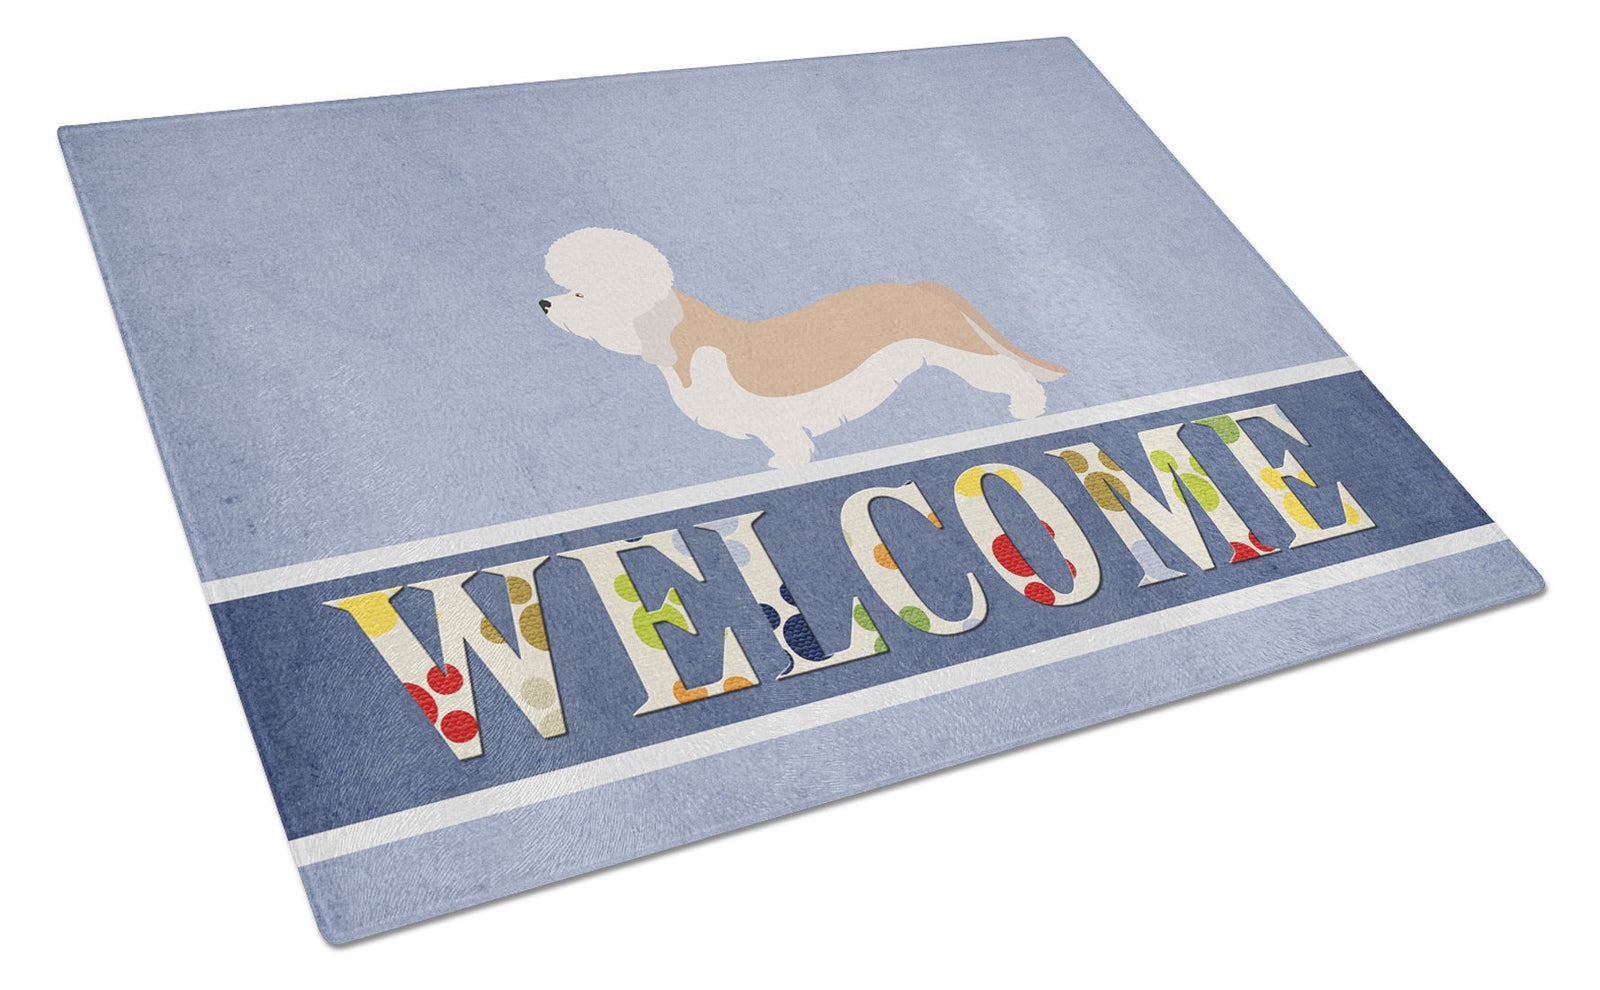 Dandie Dinmont Terrier Welcome Glass Cutting Board Large BB8312LCB by Caroline's Treasures